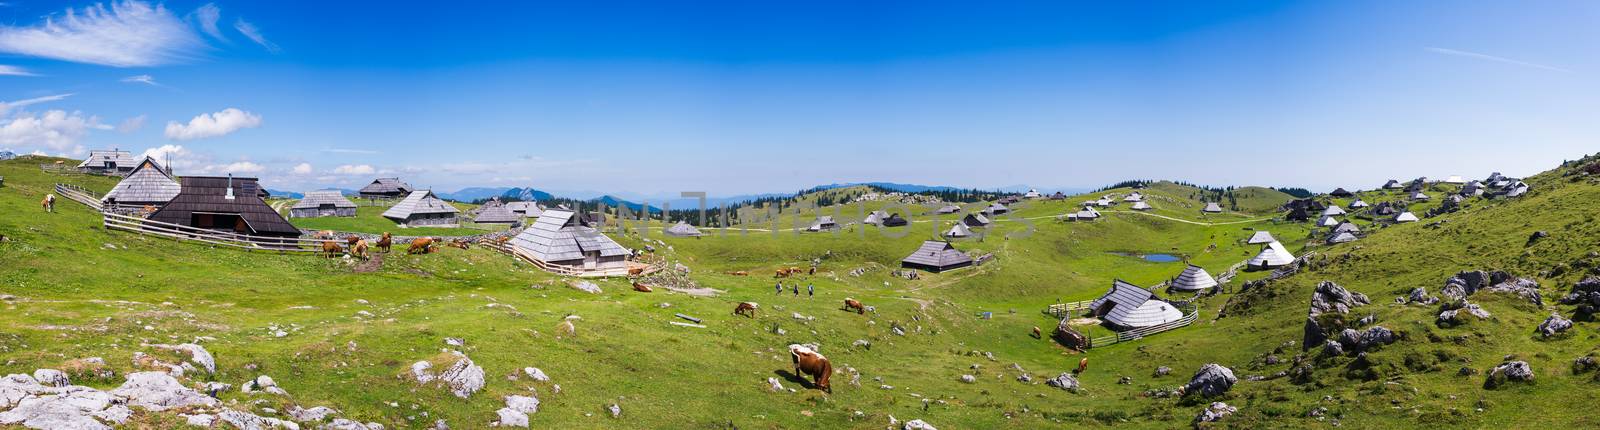 Velika planina plateau, Slovenia, Mountain village in Alps, wooden houses in traditional style, popular hiking destination, XXL size panorama by asafaric